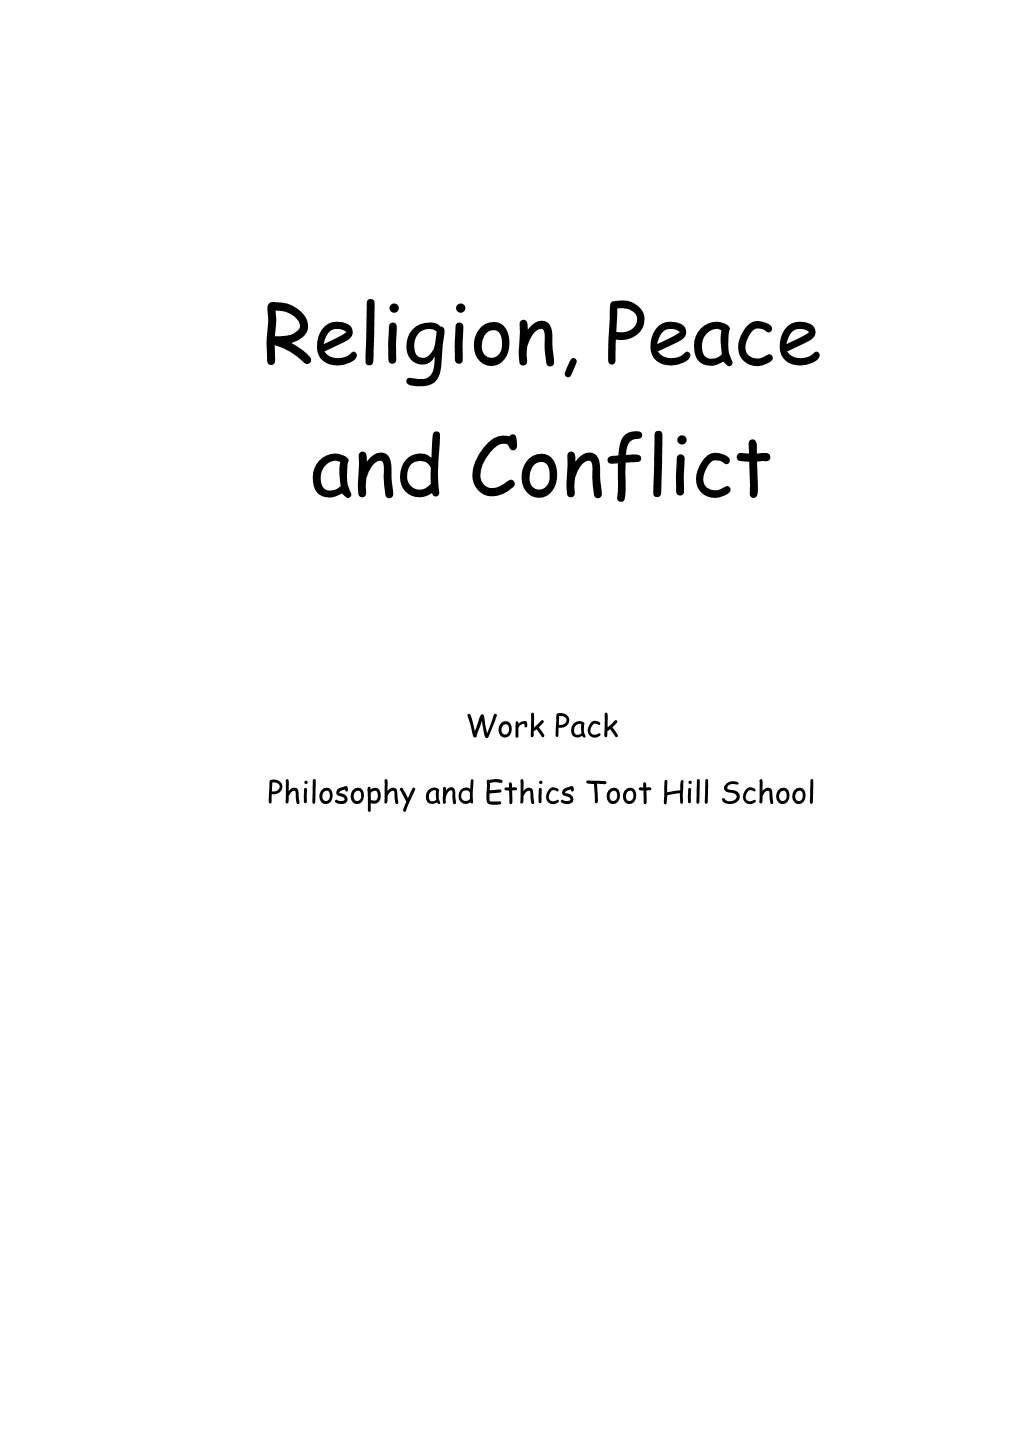 Religion, Peace and Conflict